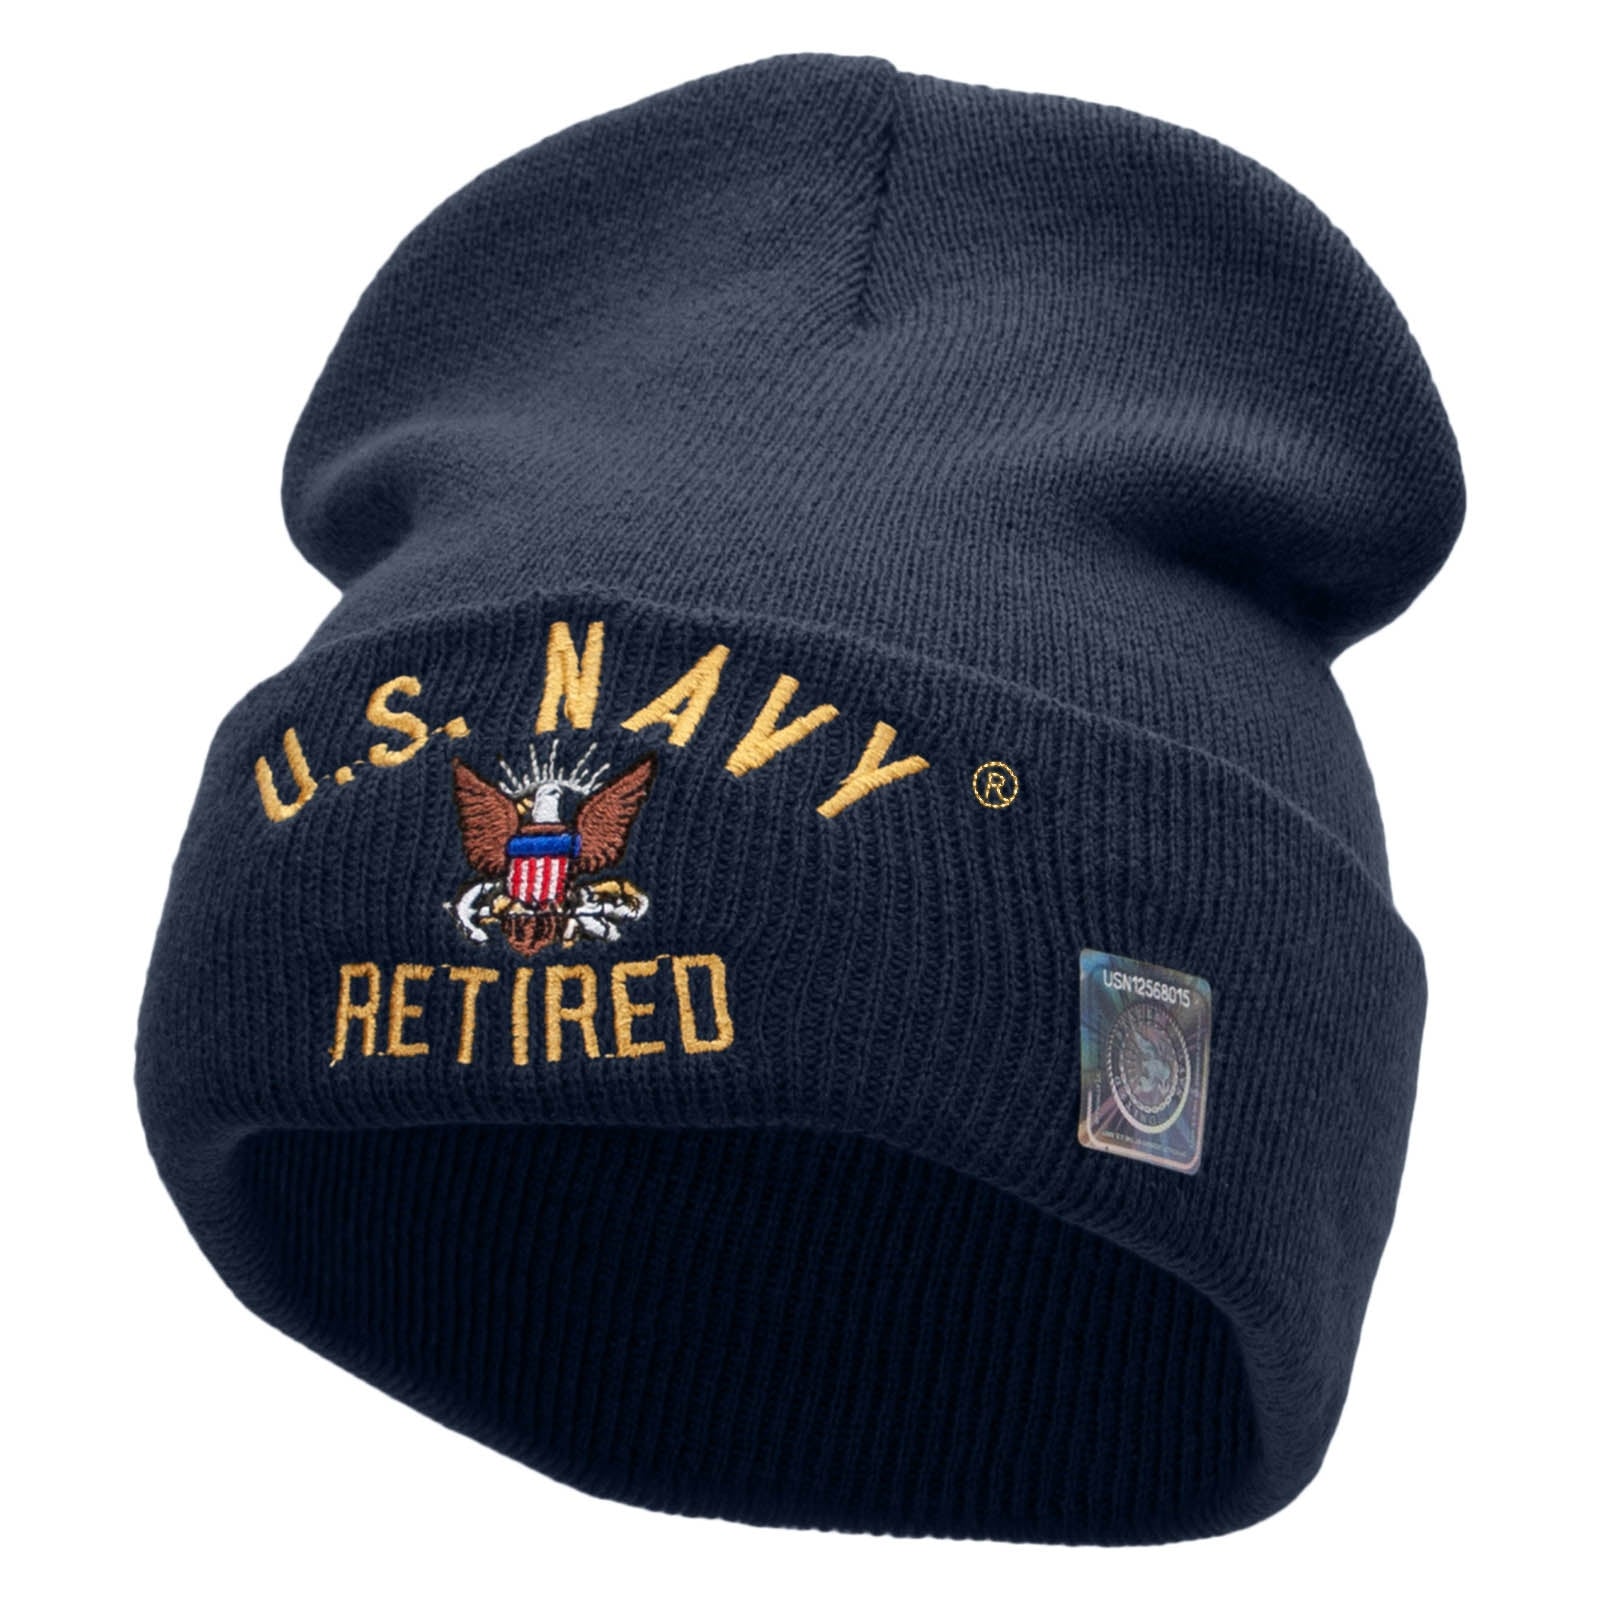 Licensed US Navy Retired Military Embroidered Long Beanie Made in USA - Navy OSFM